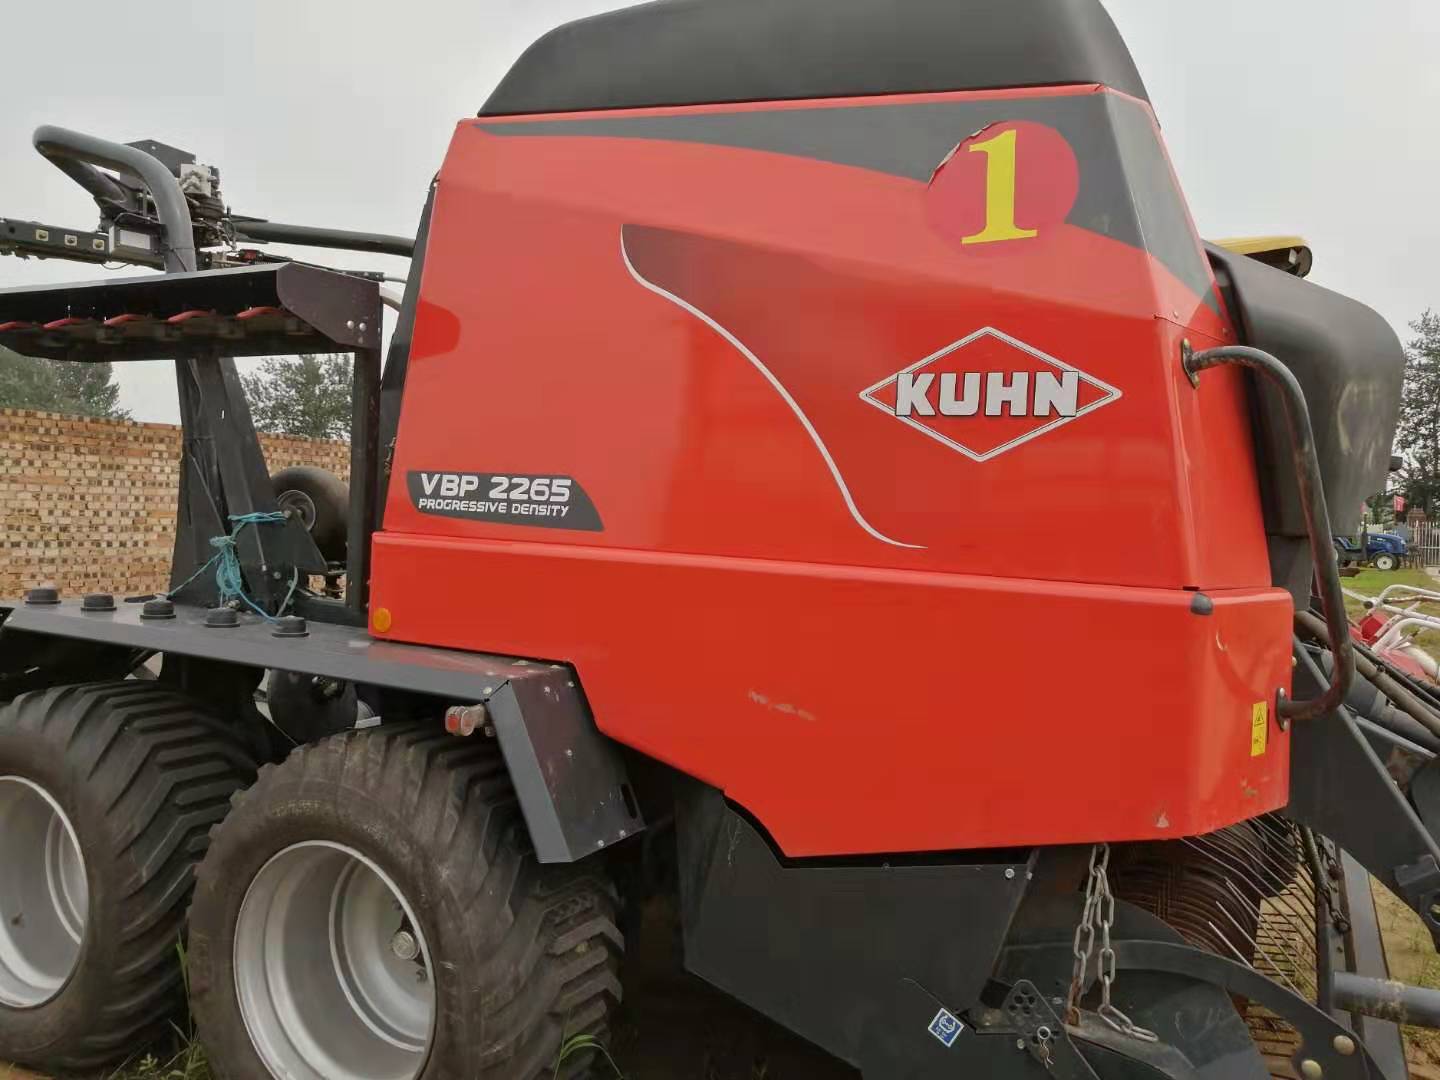 2018 Year Kuhn VBP 2265 Baler and Wrapping, Made in Netherland, only around 900 baler number. (图1)